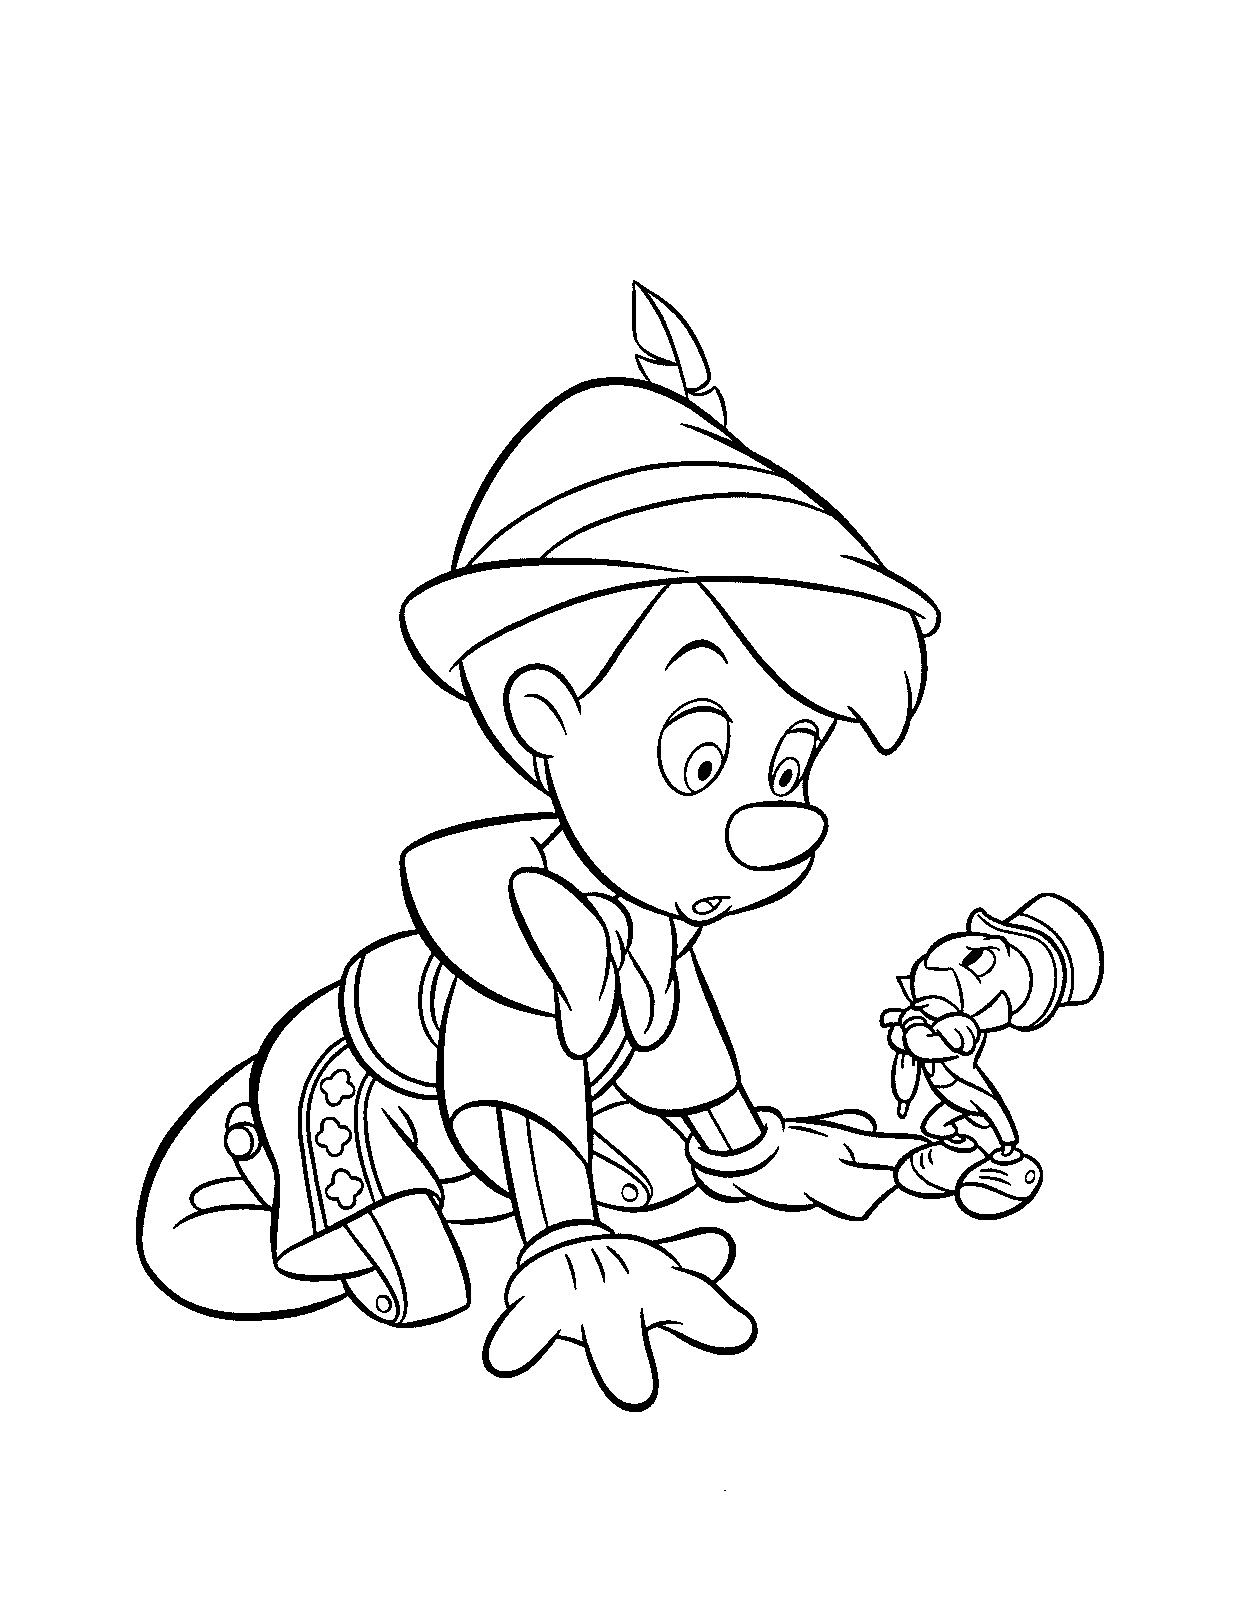 Pinocchio Coloring Pages TV Film Pinocchio For Kids Printable 2020 06387 Coloring4free